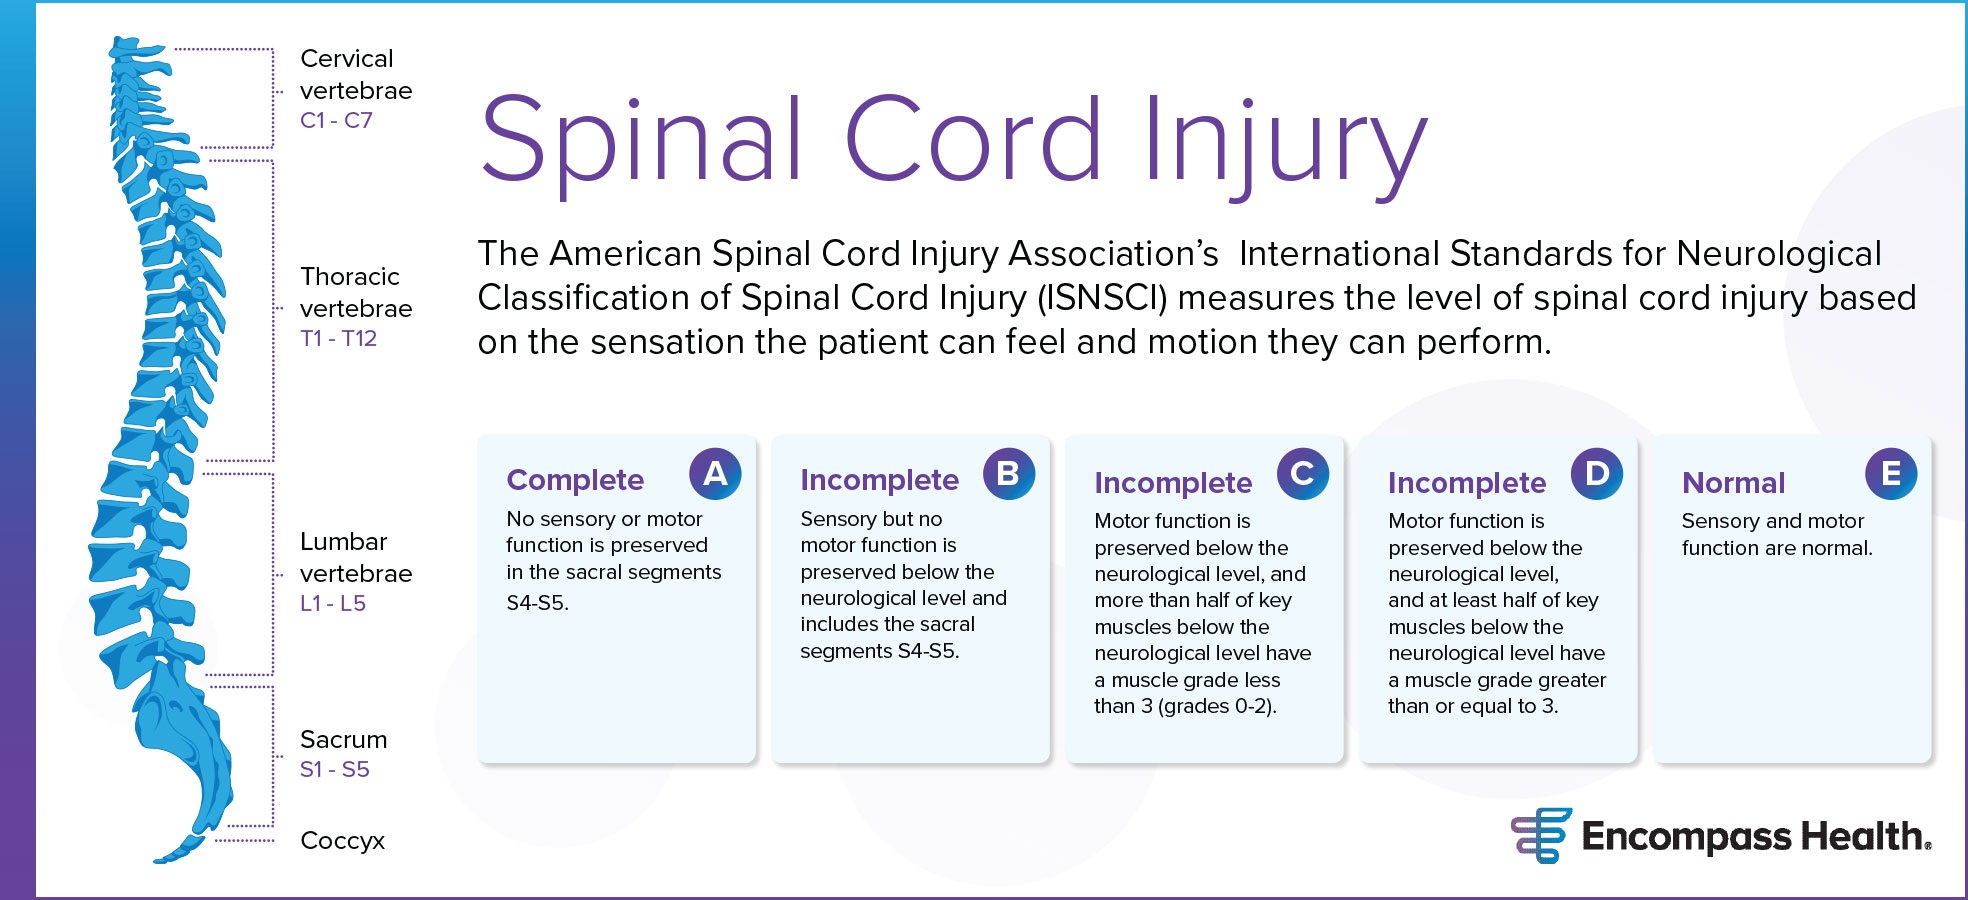 Types Of Spinal Cord Injury And Recovery Options